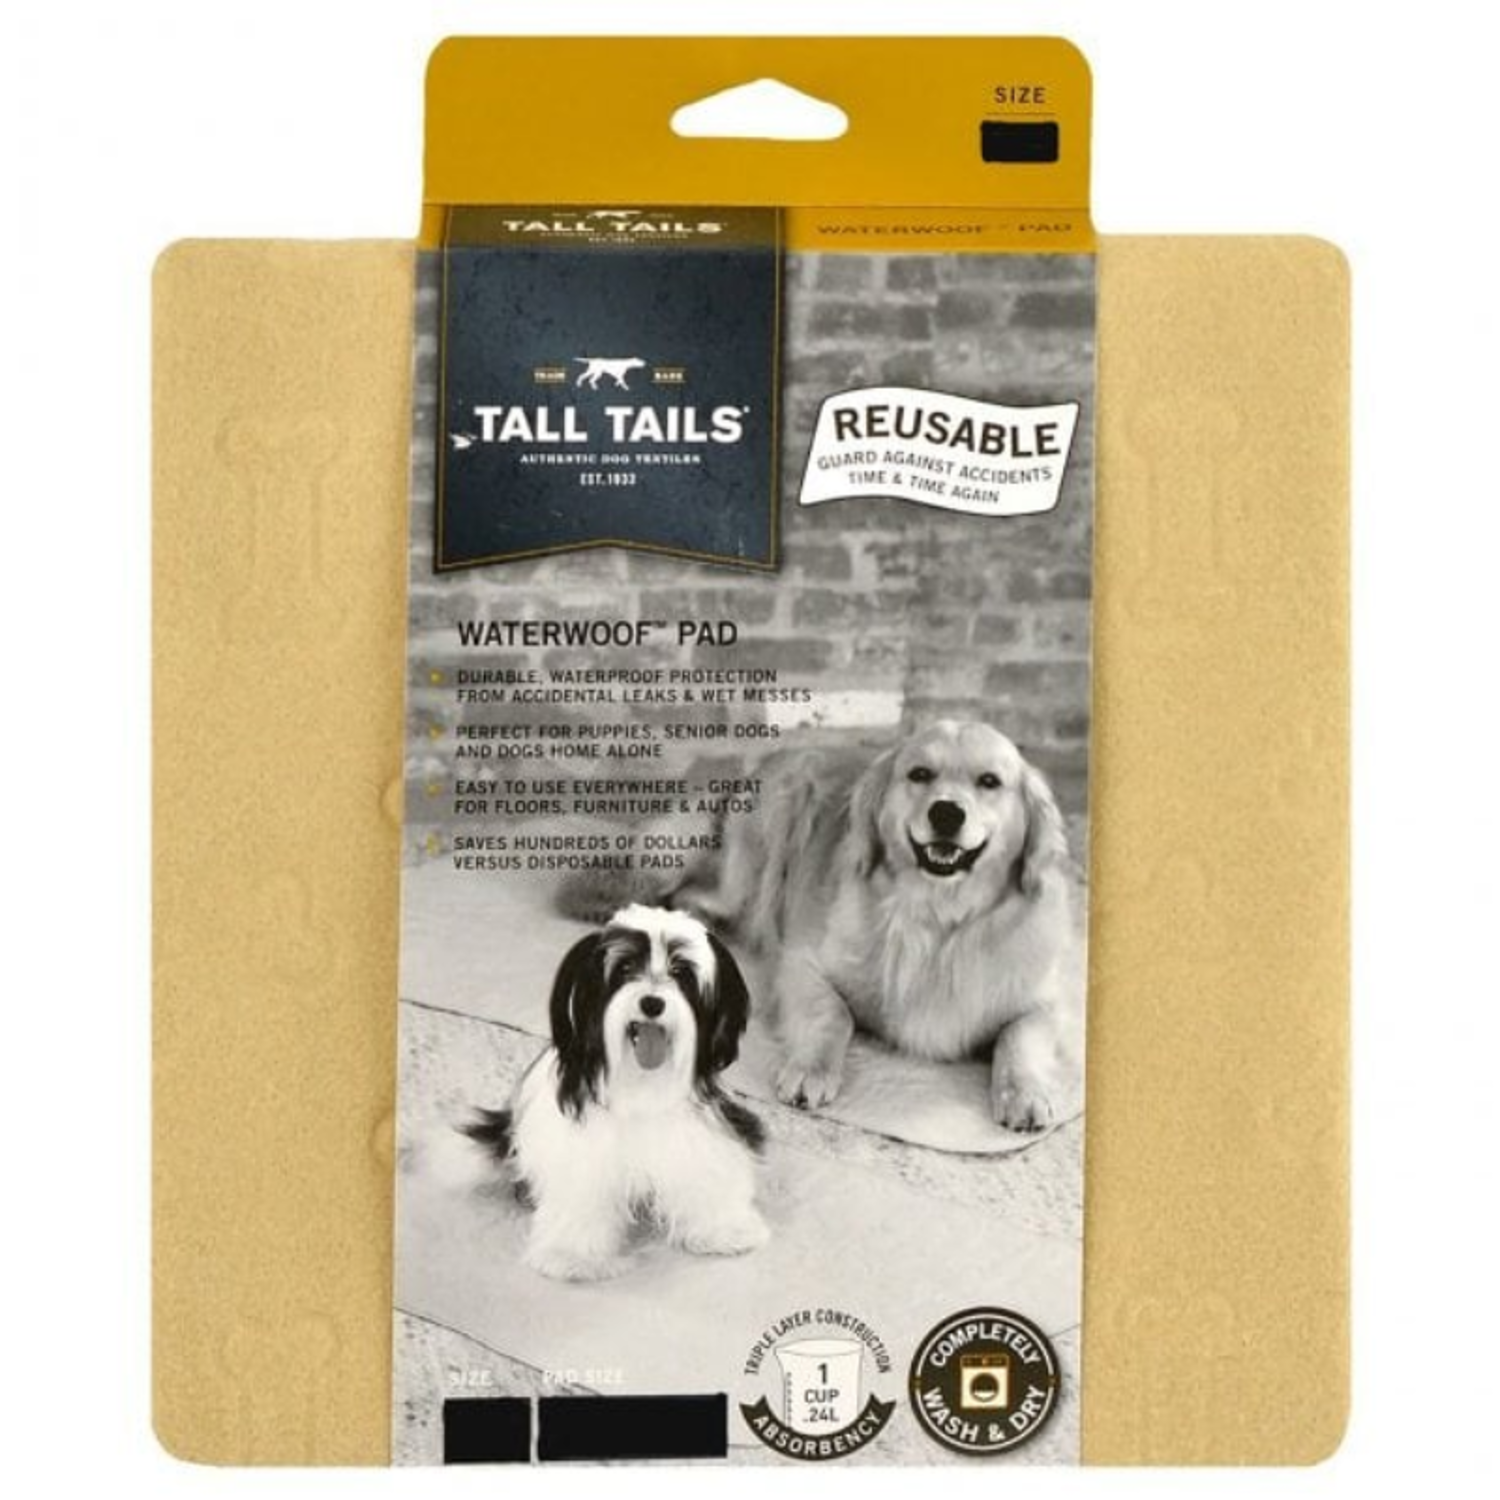 Tall Tails Re-Usable Waterproof Doggy Pads